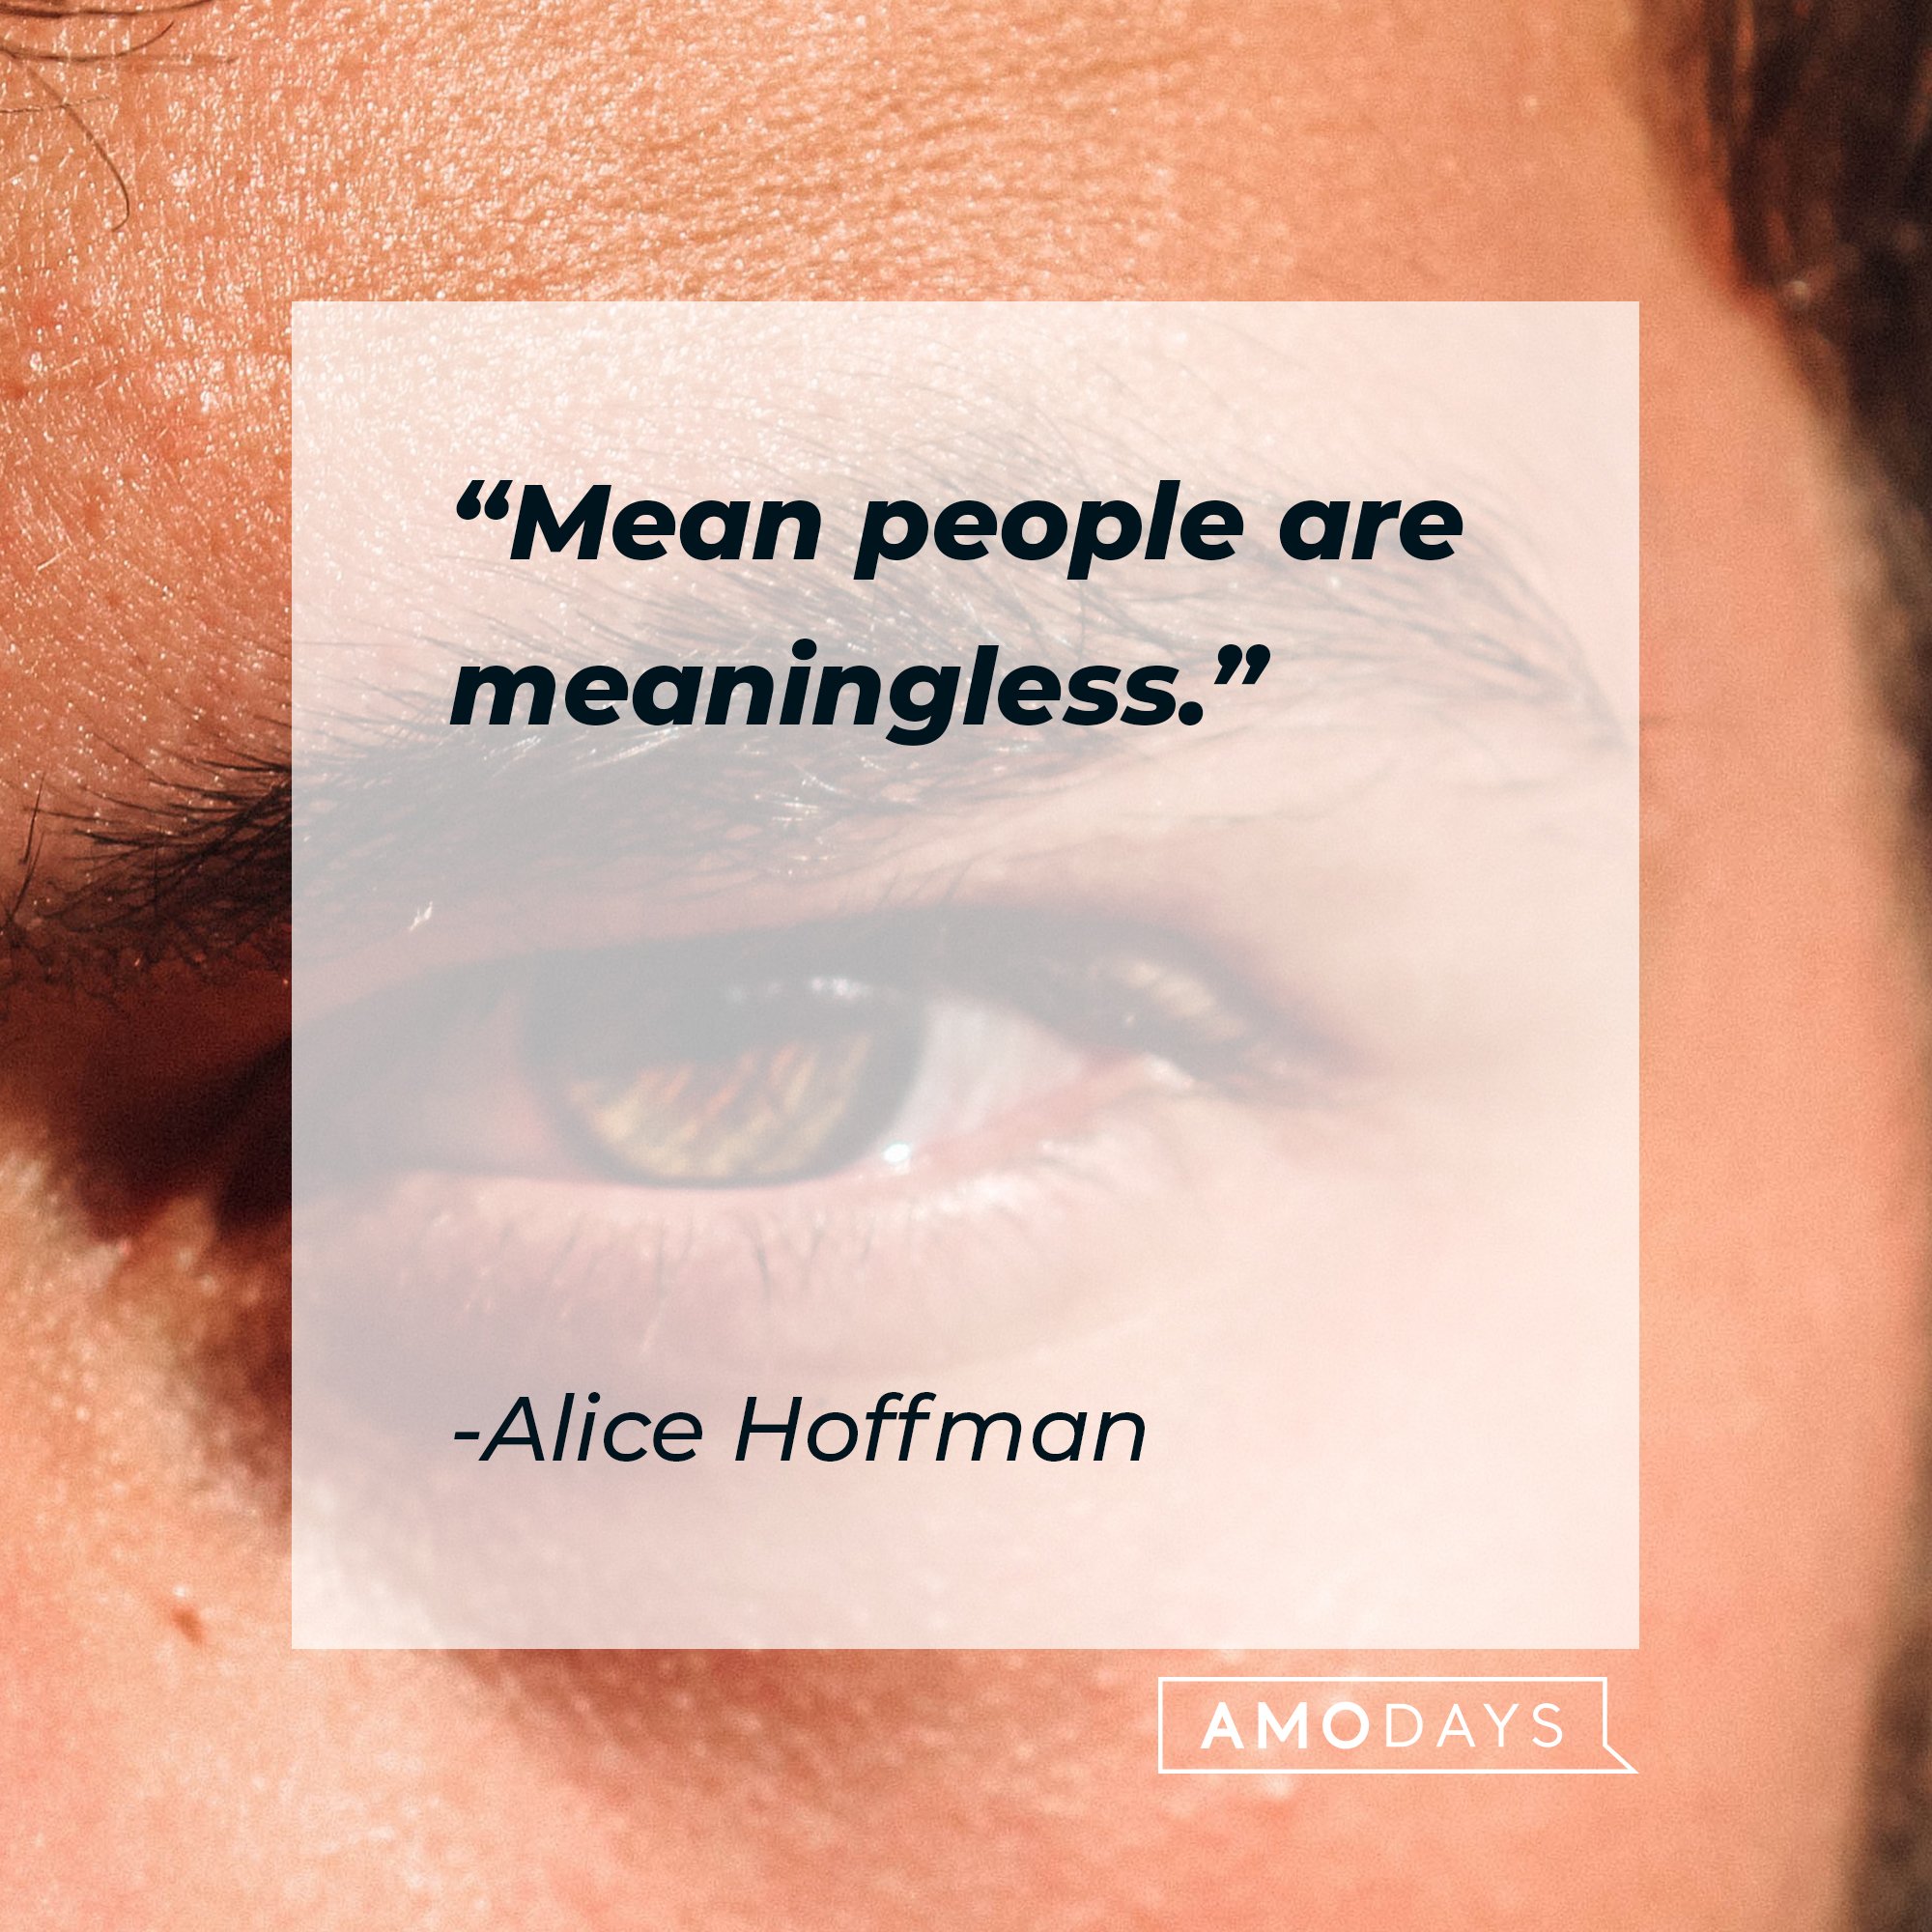 Alice Hoffman's quote: "Mean people are meaningless." | Image: AmoDays